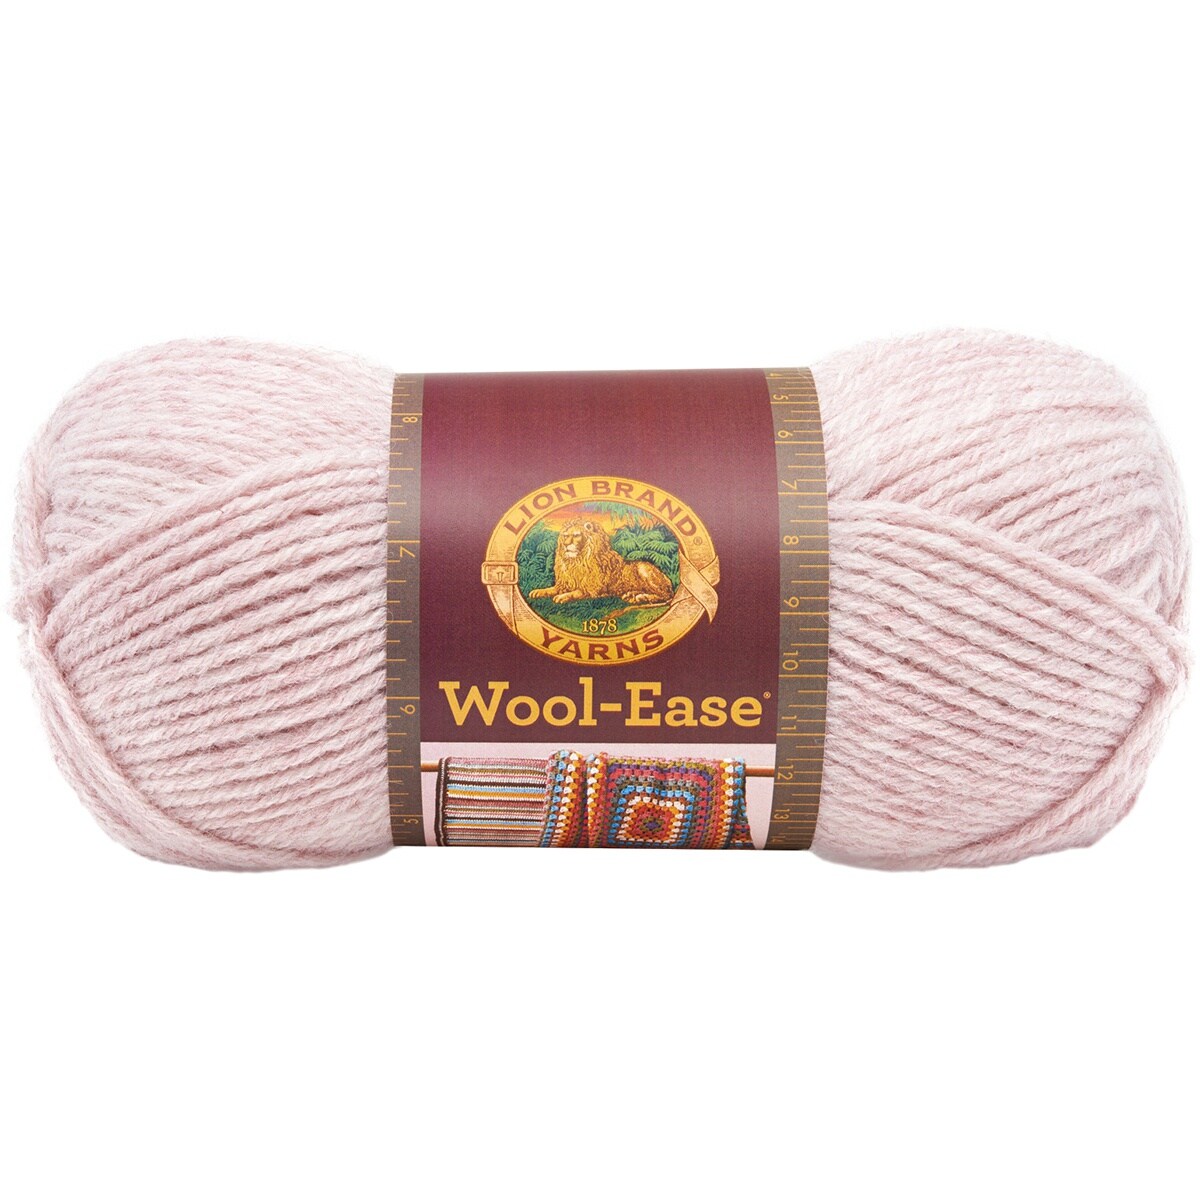 Multipack of 10 - Lion Brand Wool-Ease Yarn -Blush Heather